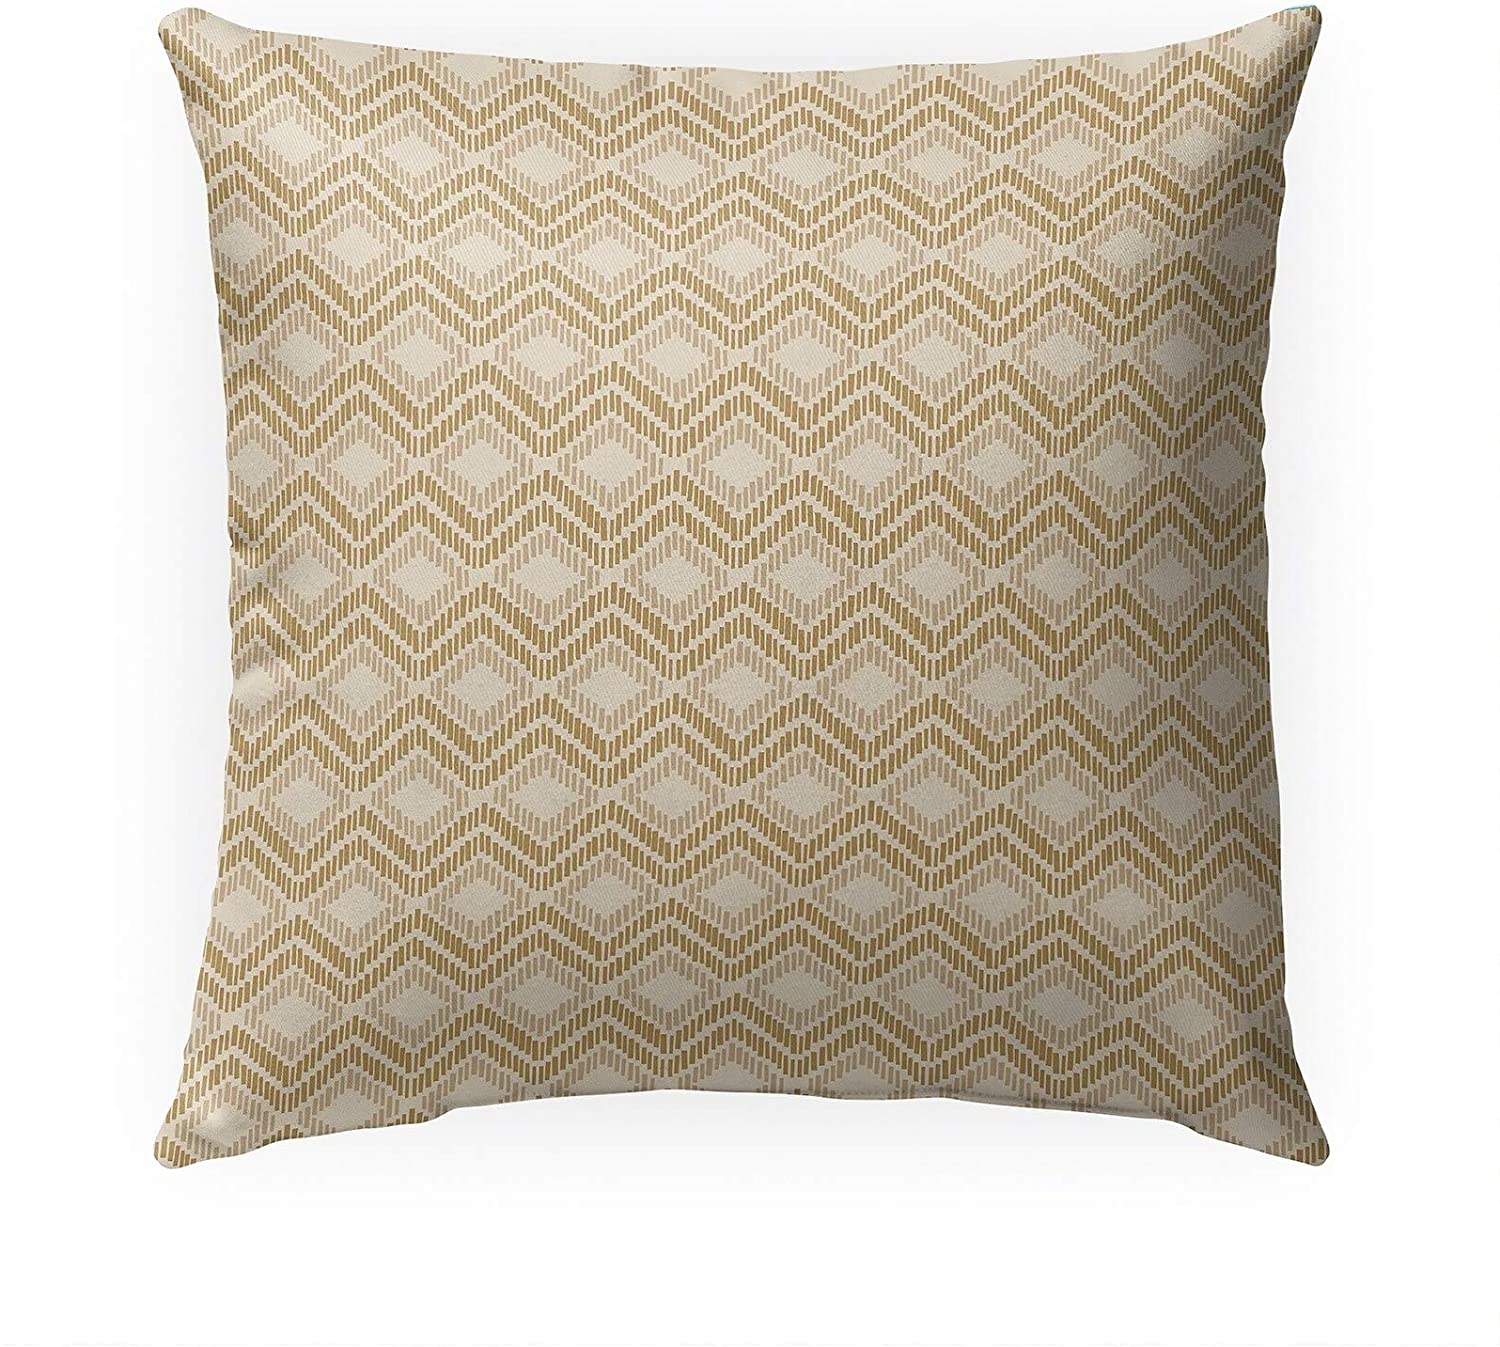 Retreat Sand Indoor|Outdoor Pillow by Tiffany N/ 18x18 Geometric Modern Contemporary Polyester Removable Cover